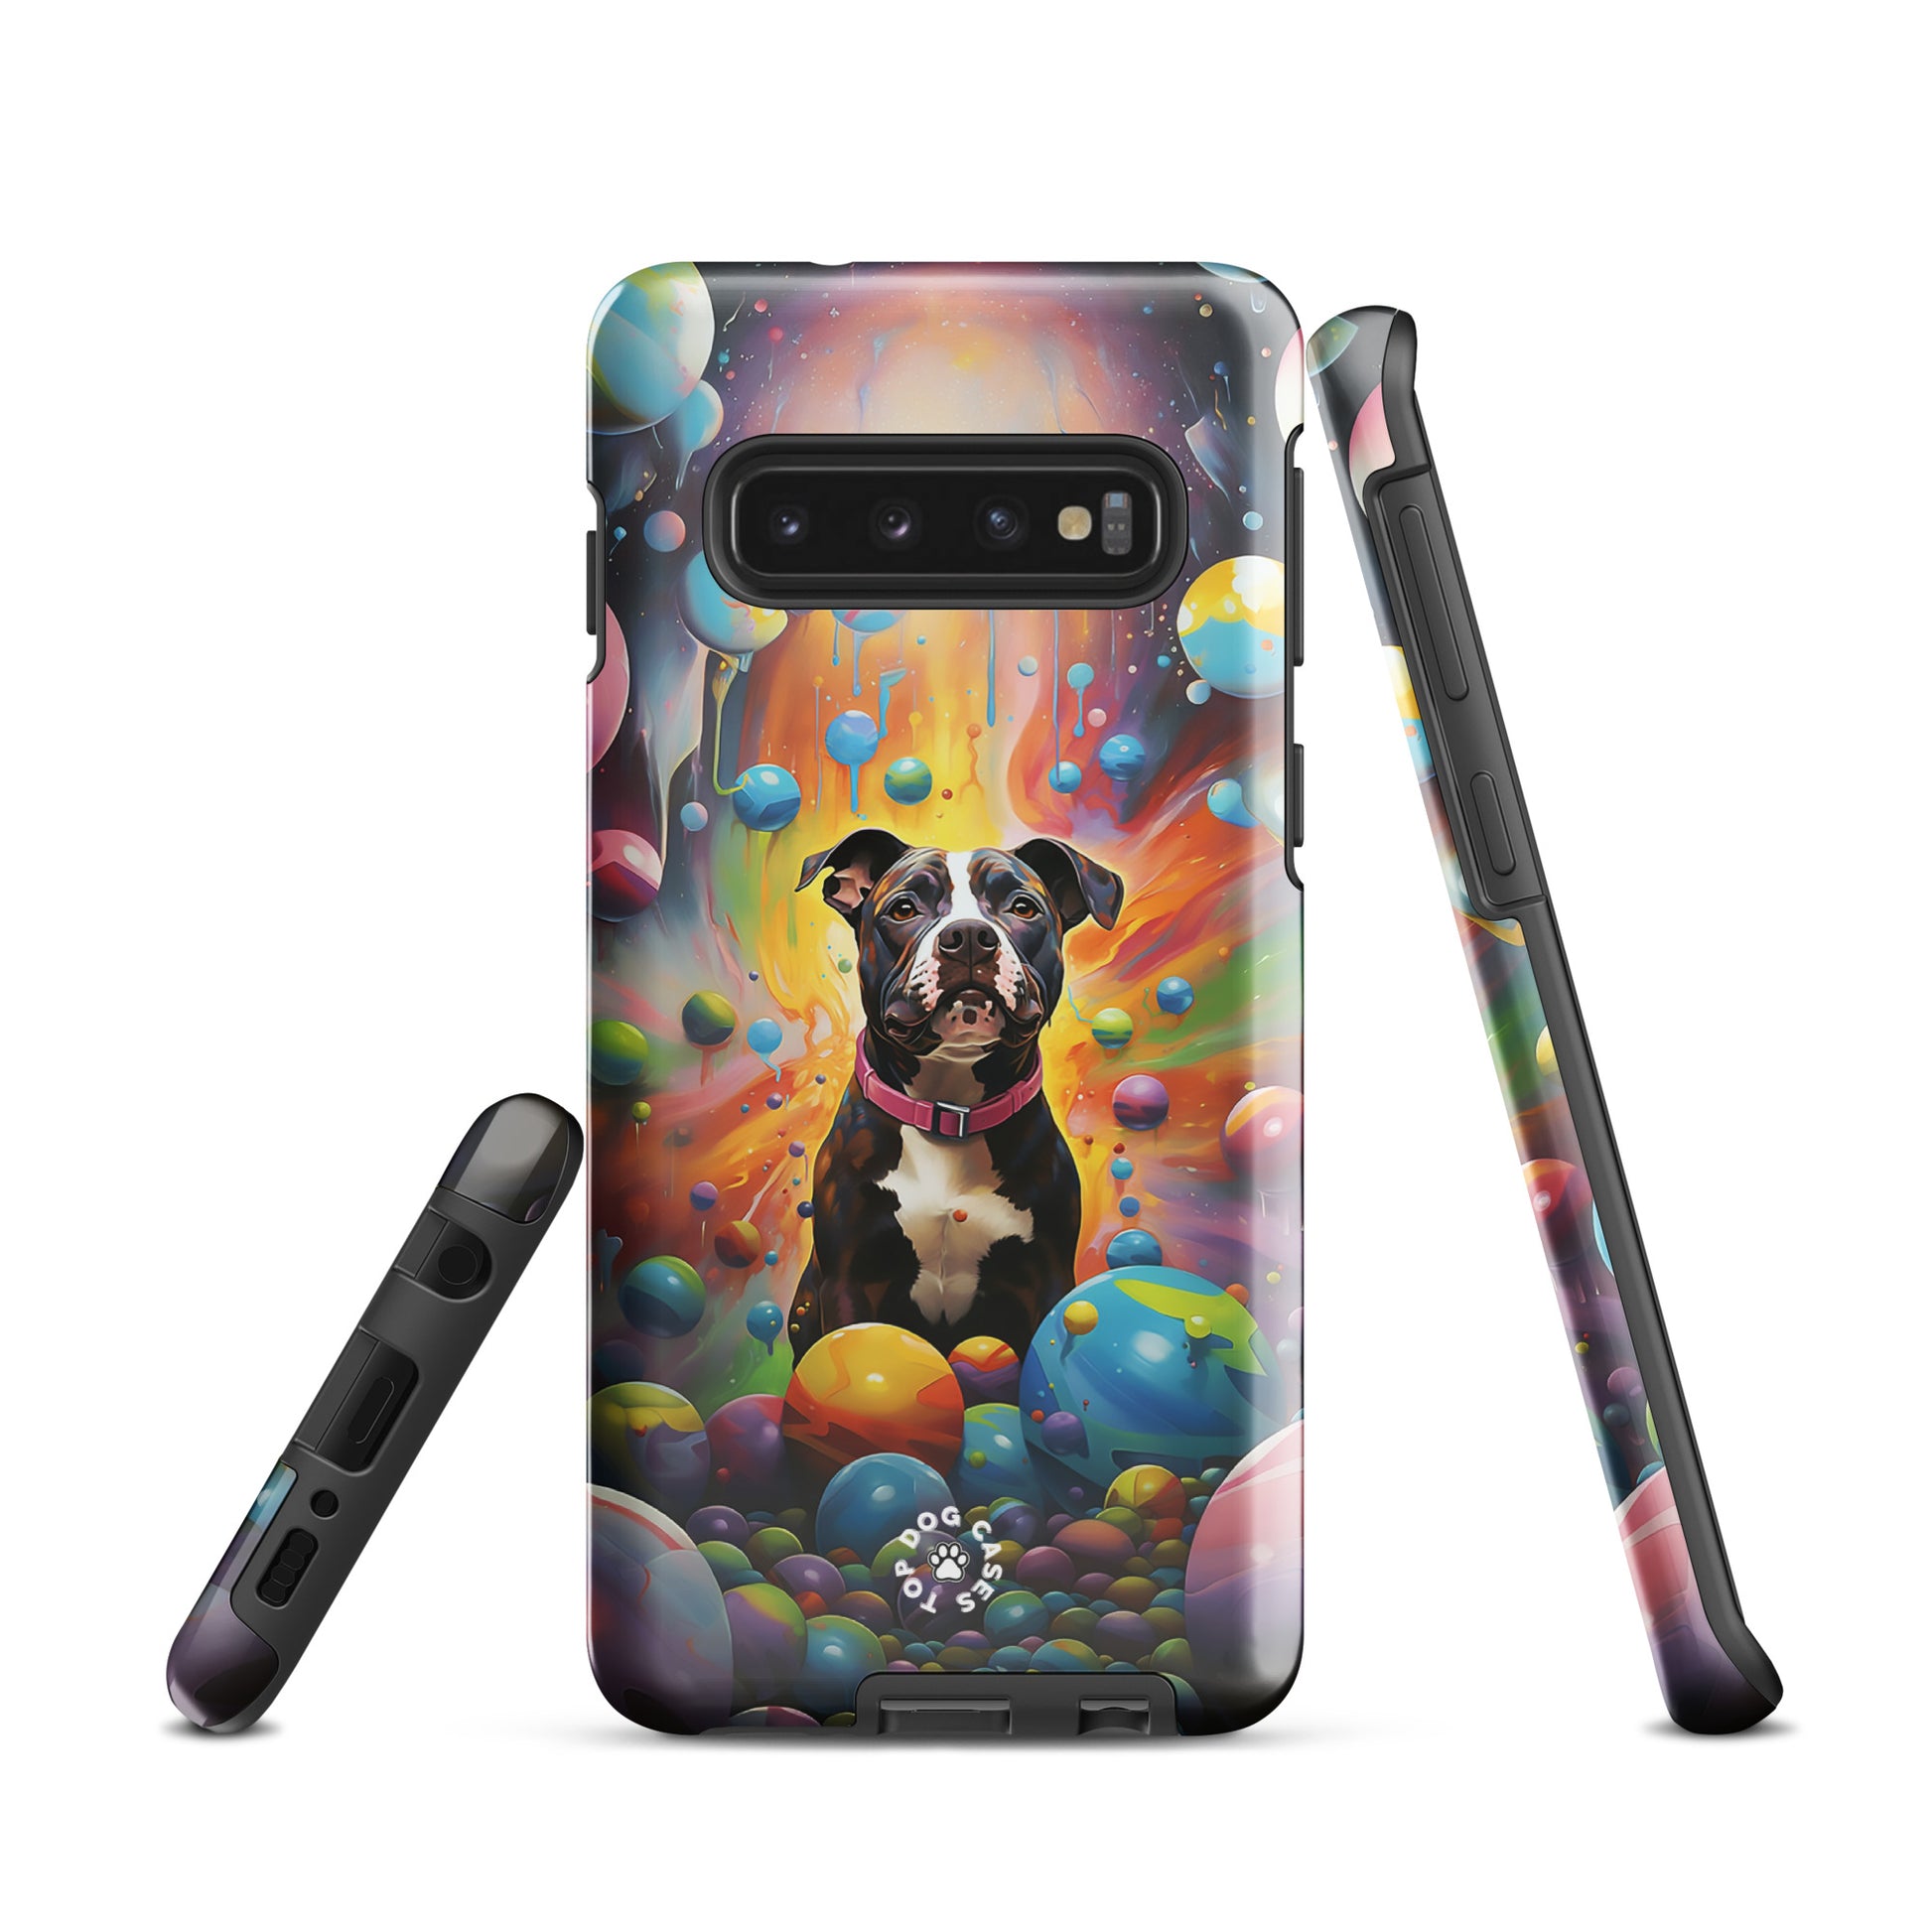 Pitbull Galaxy Edition Tough Case for Samsung - Top Dog Cases - #CuteDog, #CuteDogs, #DogInSpace, #DogPhoneCase, #Pitbull, #Samsung, #SamsungGalaxy, #SamsungGalaxyCase, #SamsungGalaxyS10, #SamsungGalaxyS20, #SamsungGalaxyS21, #SamsungGalaxyS22, #SamsungGalaxyS22Ultra, #SamsungGalaxyS23, #SamsungGalaxyS23Plus, #SamsungGalaxyS23Ultra, #SamsungPhoneCase, SamsungGalaxyS20Plus, SamsungGalaxyS22Plus